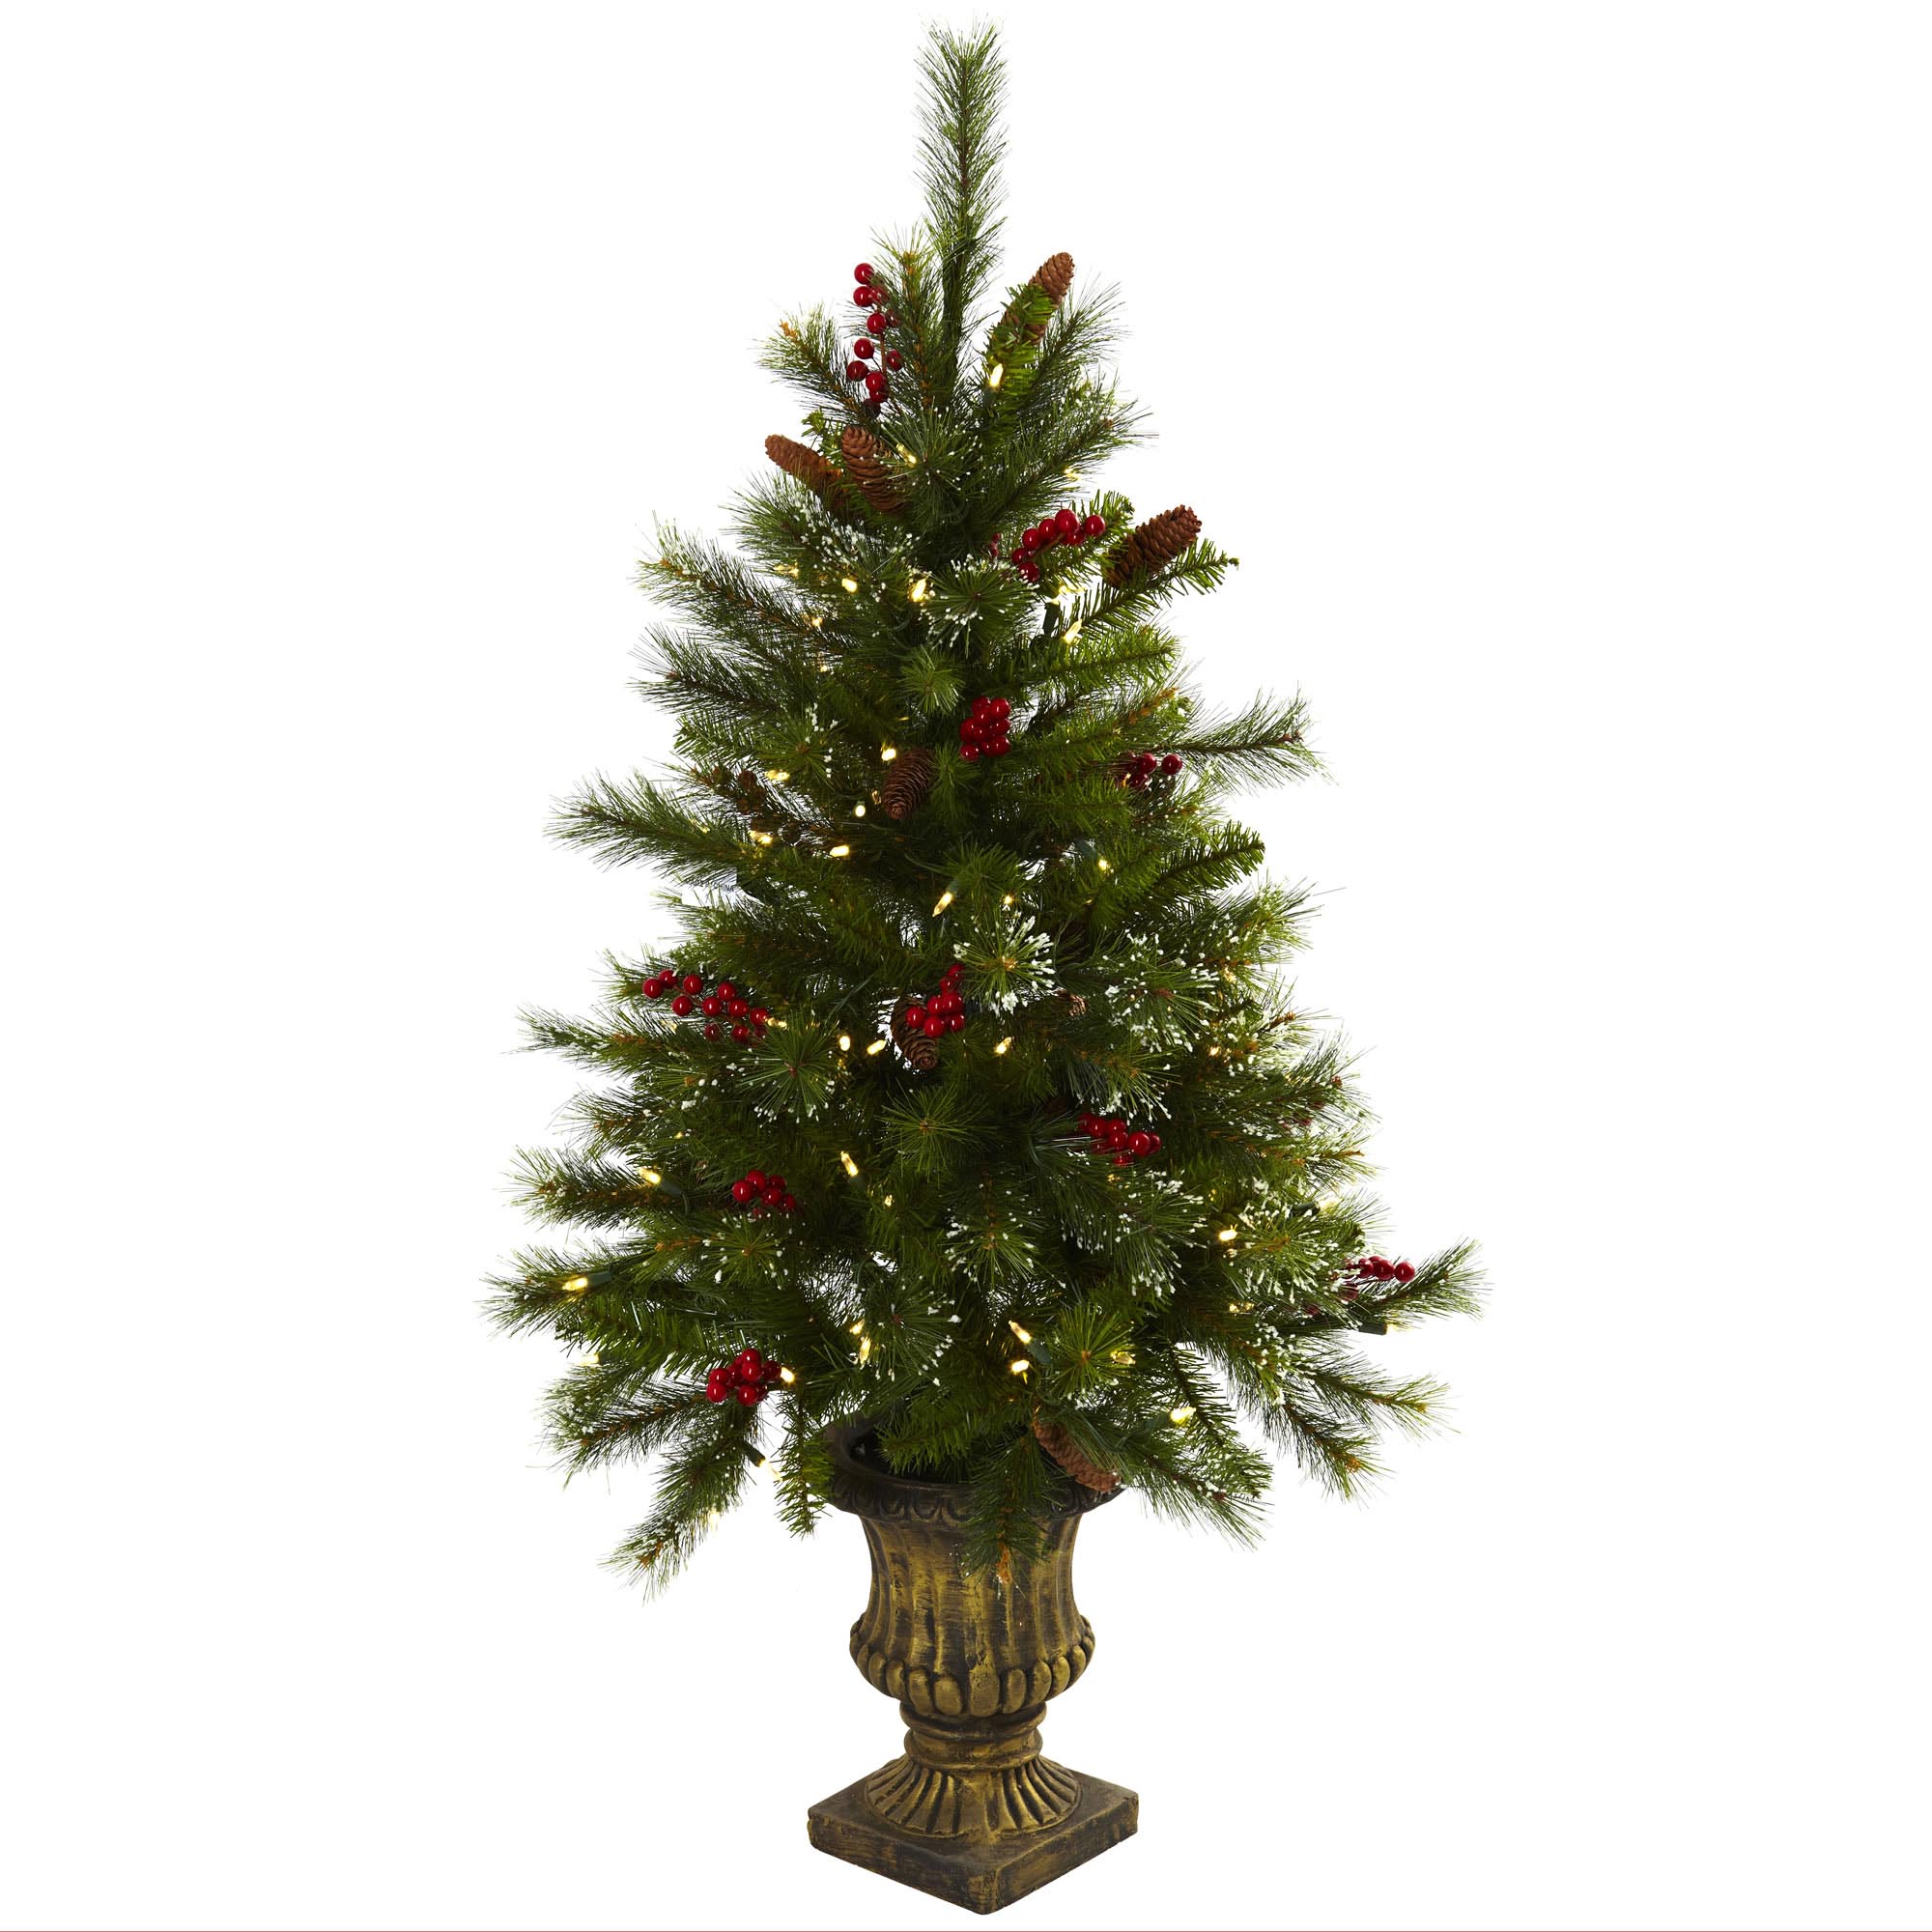 4 Foot Artificial Christmas Tree W/ Berries & Pine Cones In Urn: Led Lights